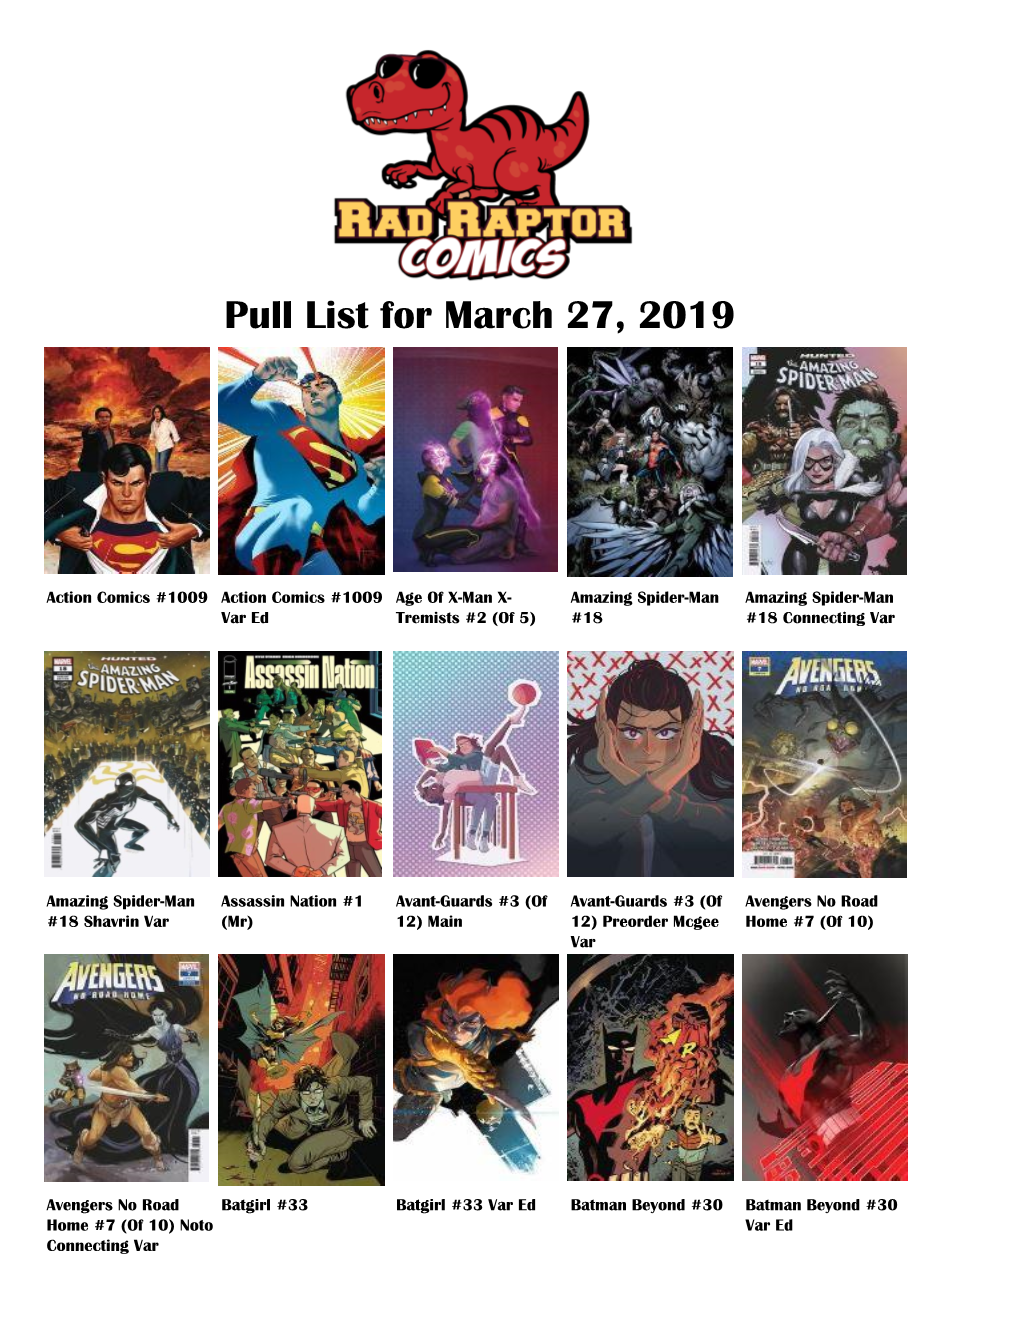 Pull List for March 27, 2019